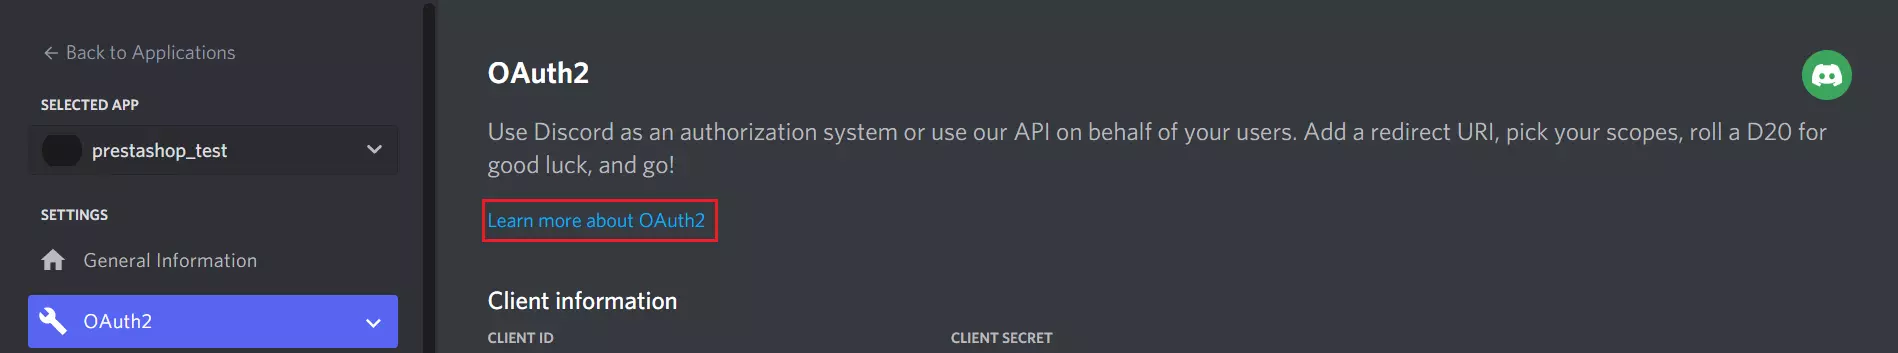 OAuth Endpoints | Discord OAuth & OpenID Single Sign-On (SSO)